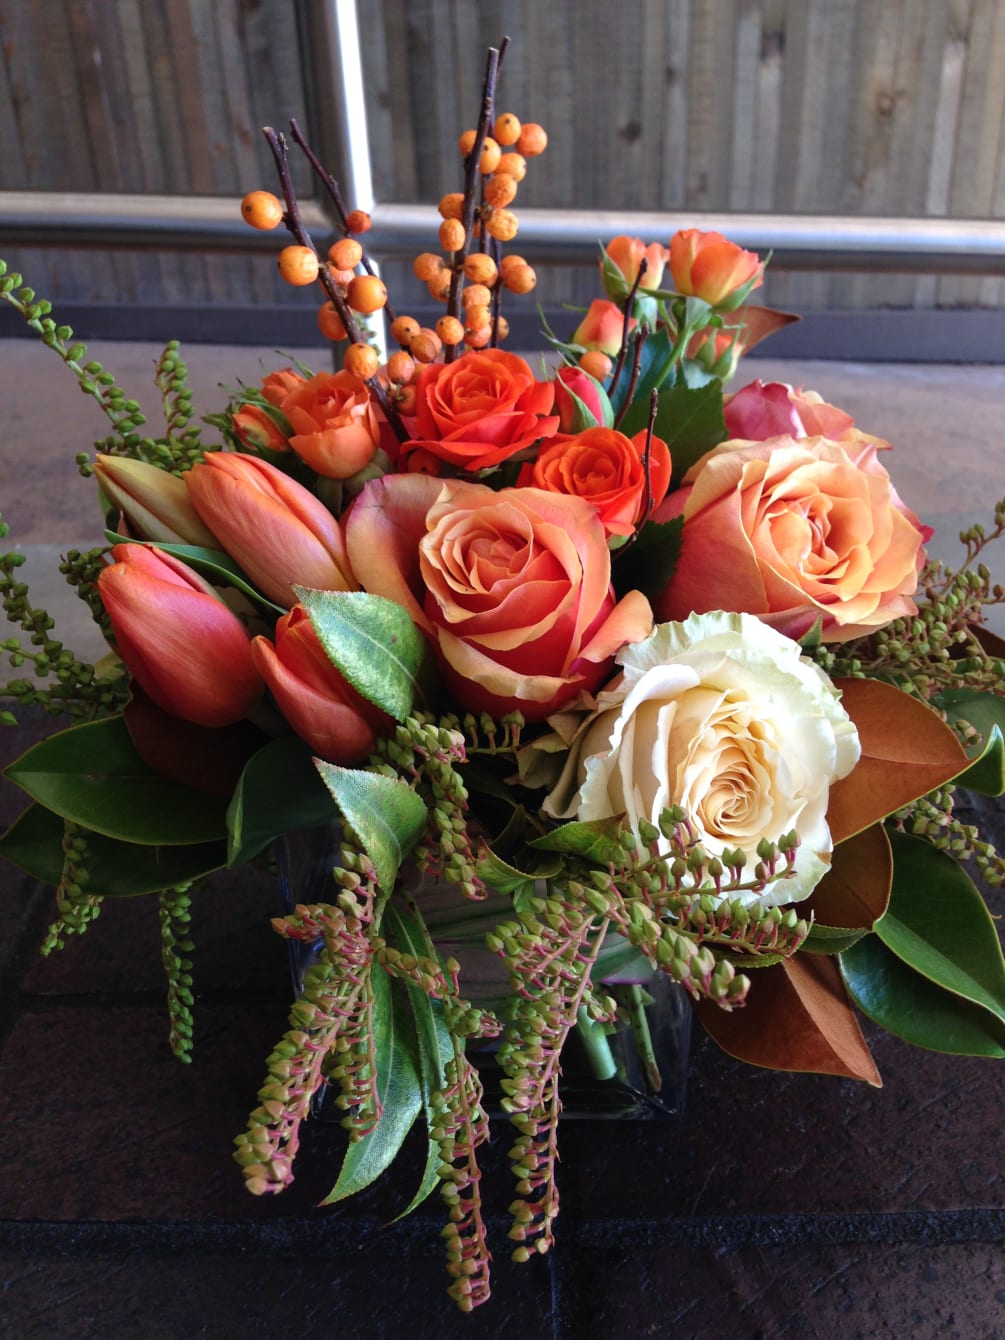 Mix of beautiful fall fillers including magnolia leaves, orange berries, tulips, spray